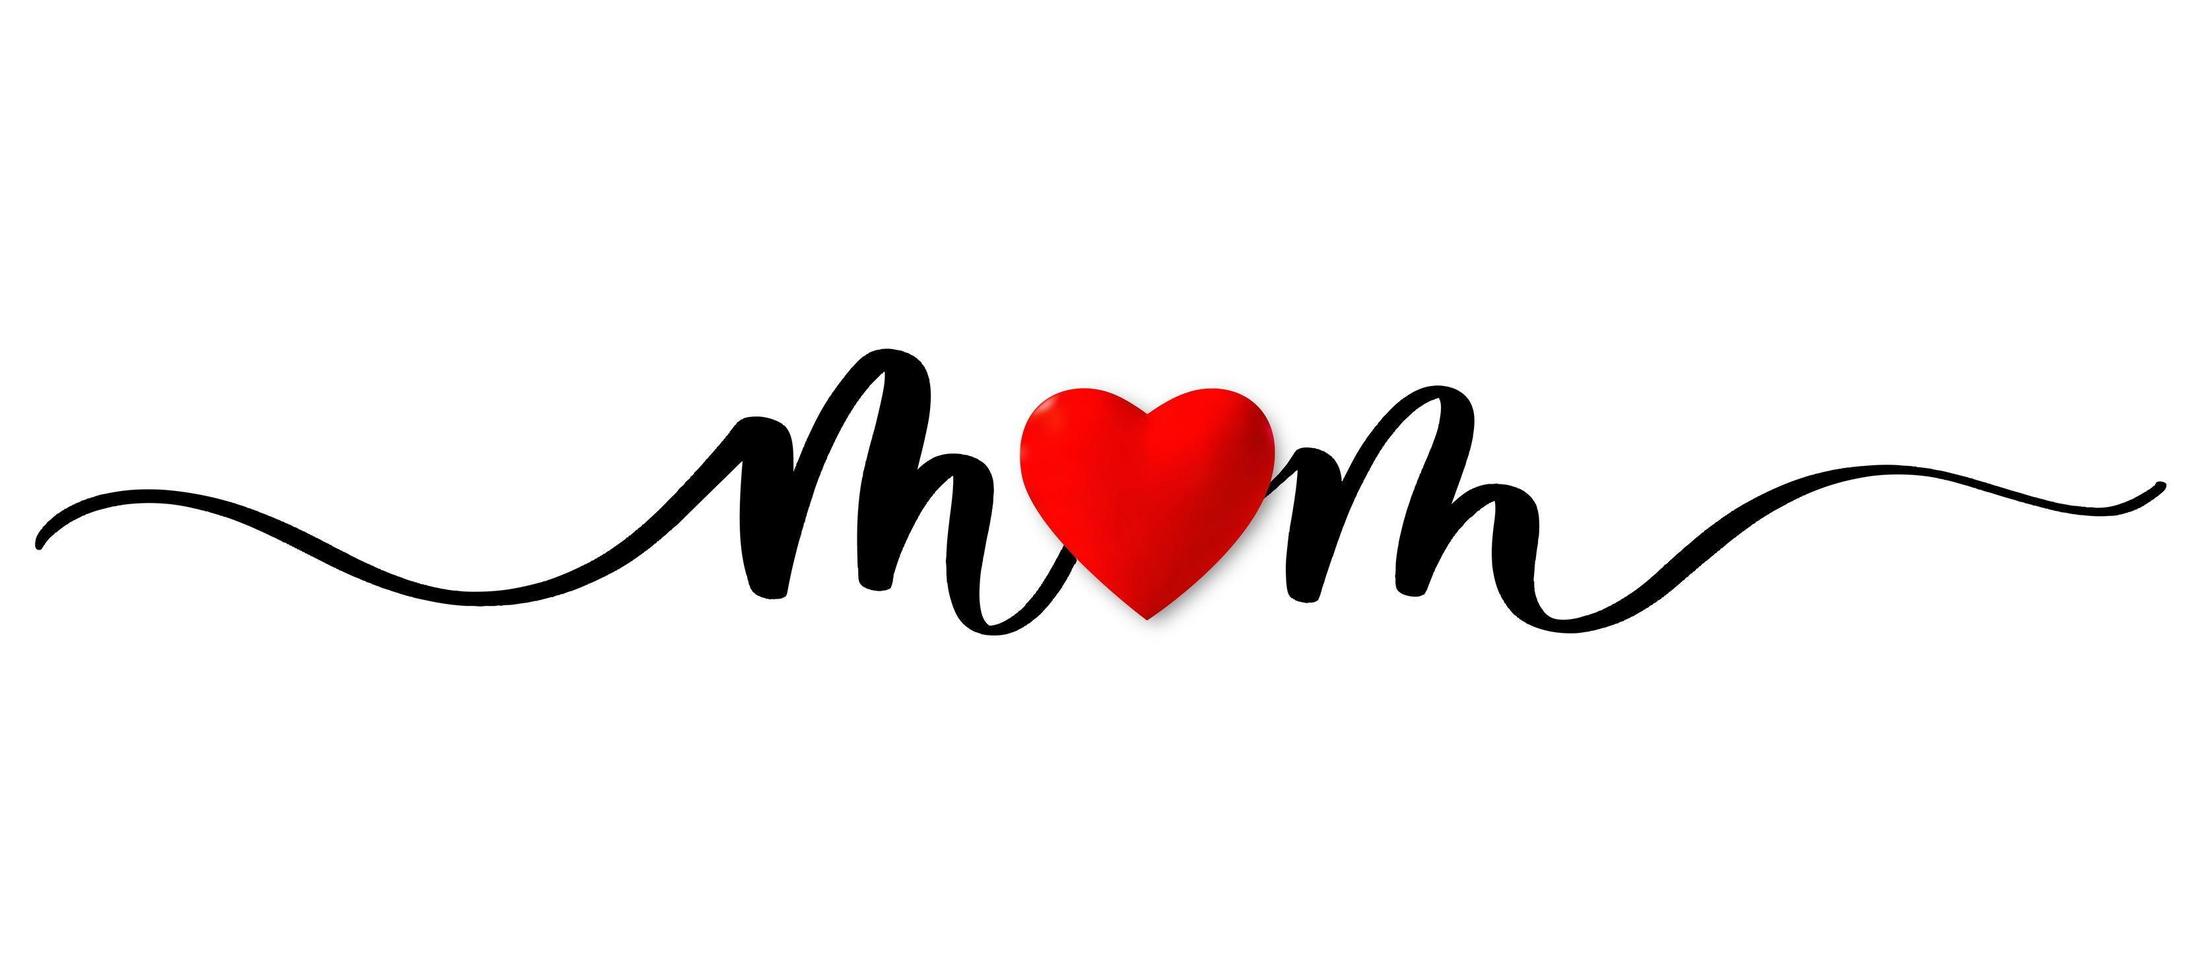 Mom vector calligraphic inscription with 3d red heart in the word. Minimalistic hand lettering illustration on Happy Mother's Day.